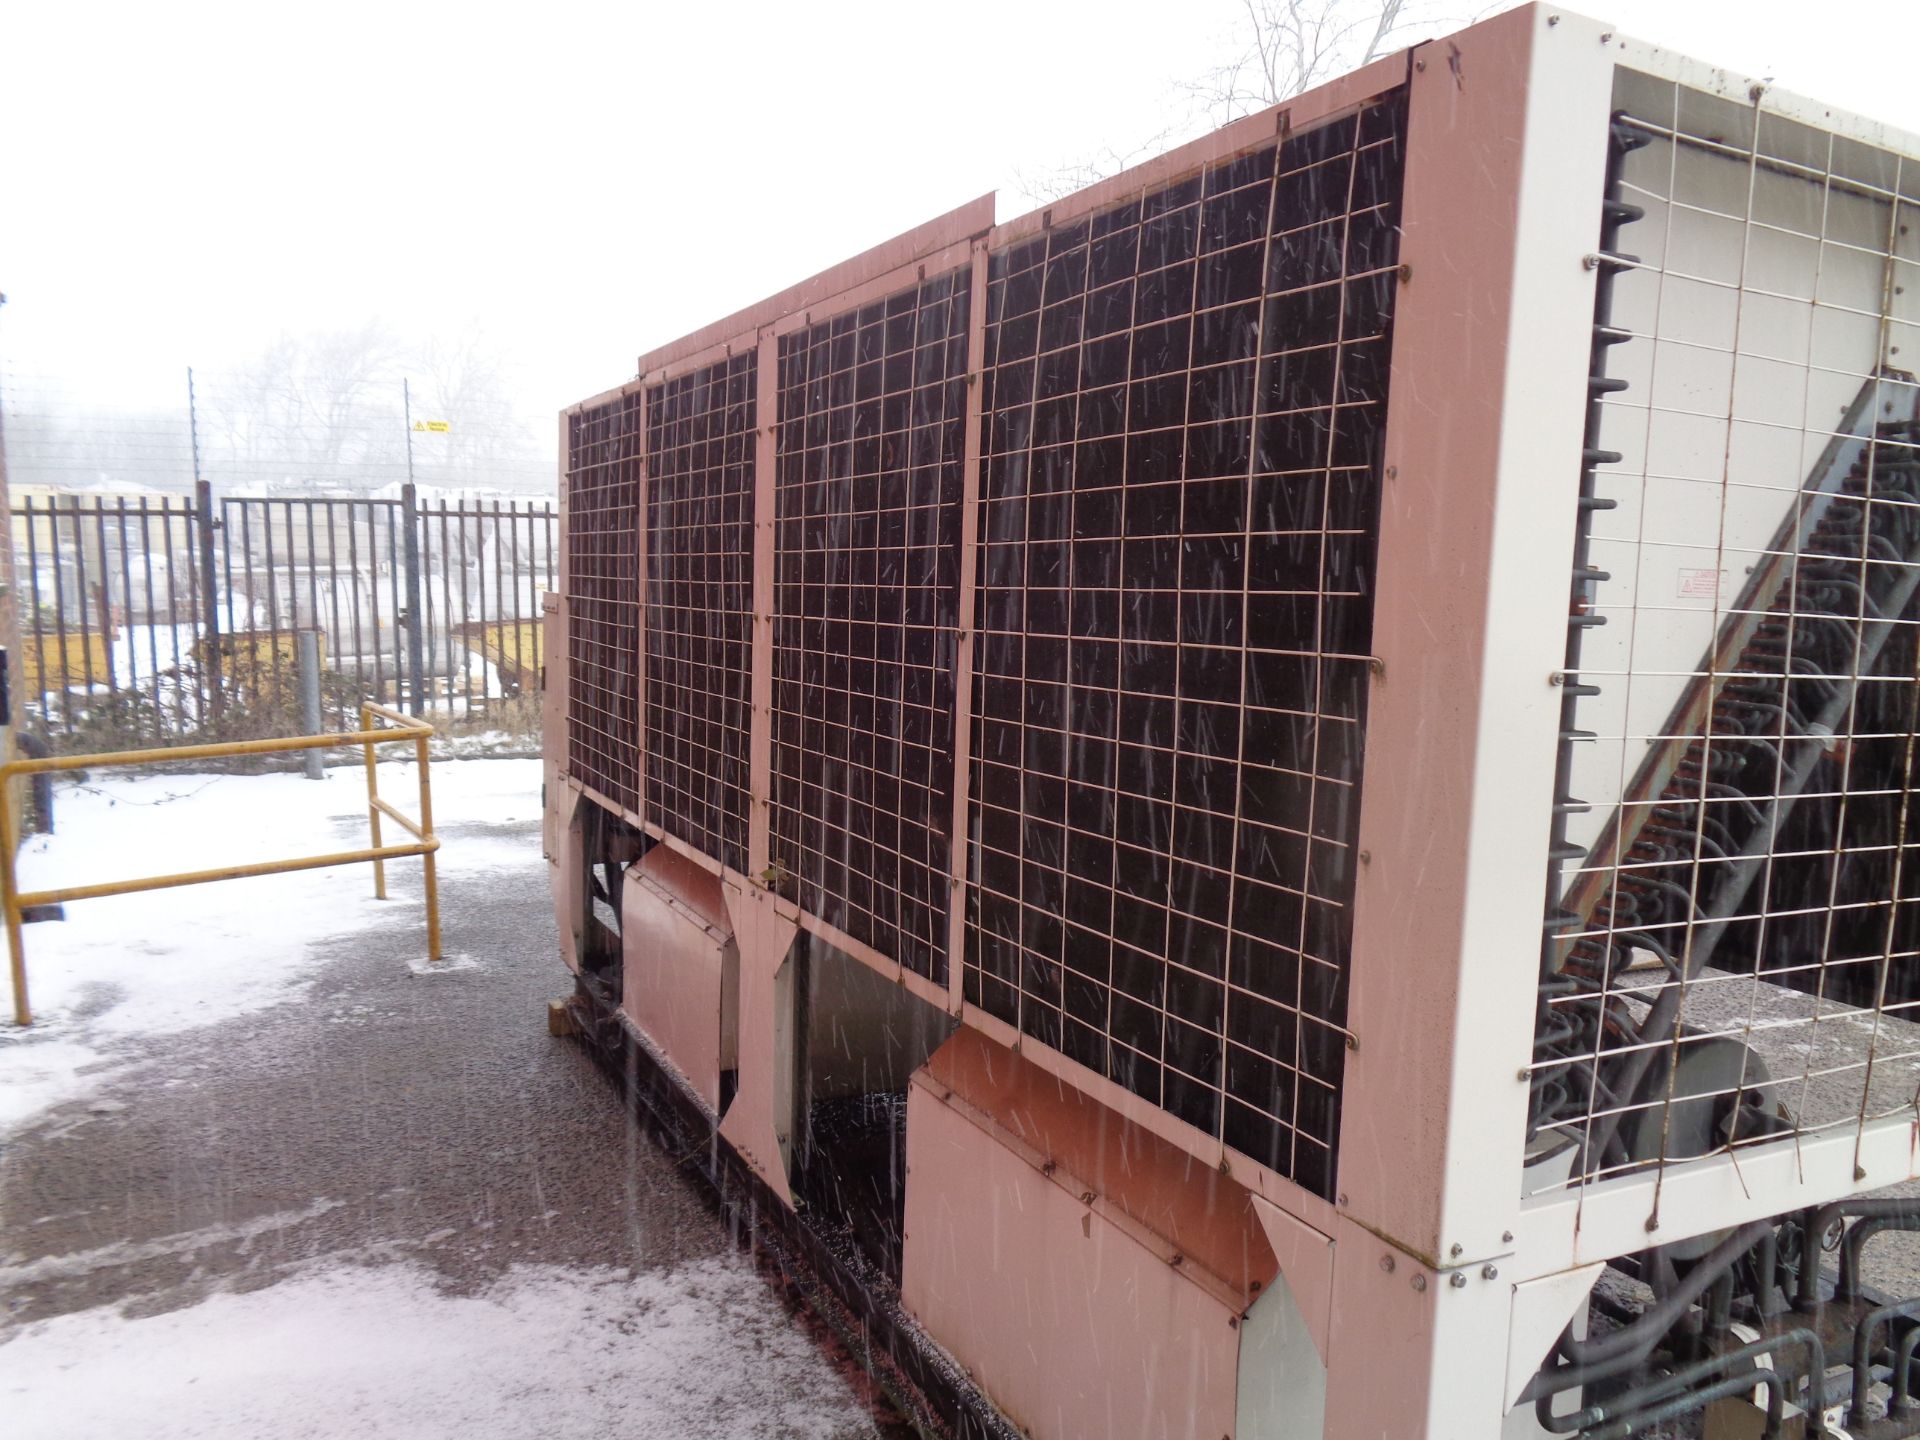 Hitachi ""H Series"" air cooled chiller model RCUG 150AHYZ1. 103 tons. New 2011. Chiller utilizes - Image 4 of 9